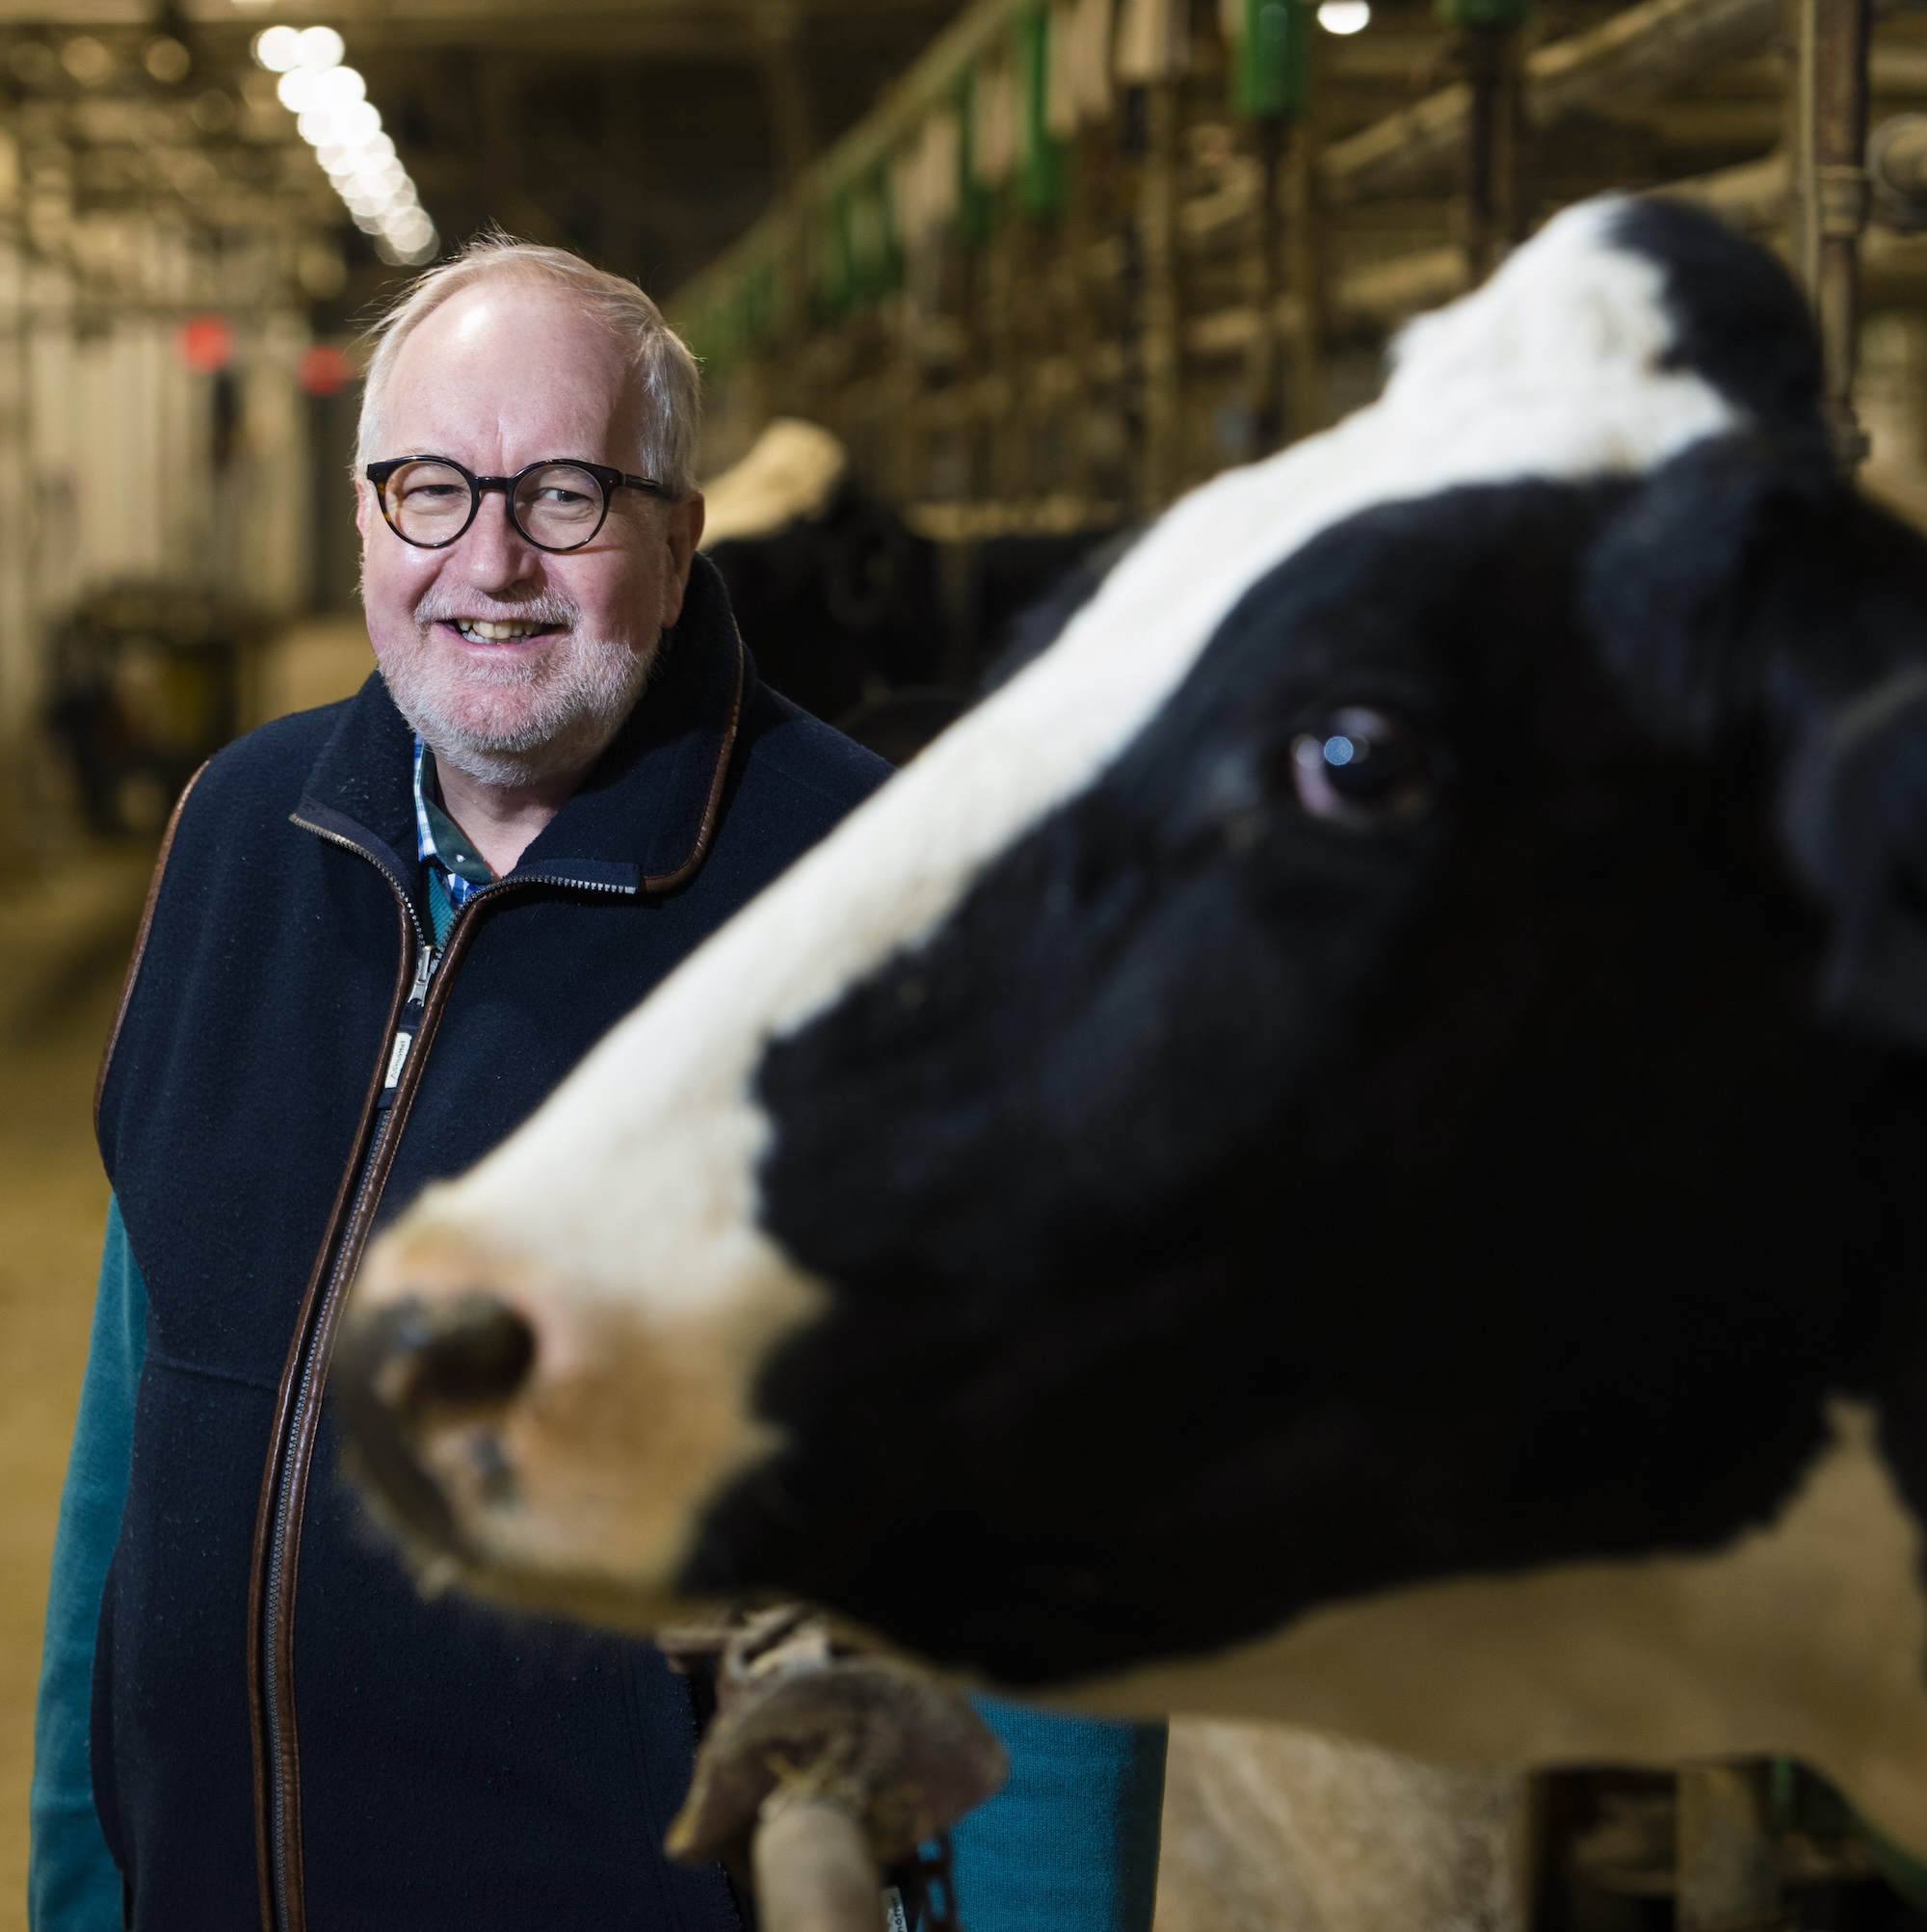 Photo of Graham Plastow posing with a dairy cow